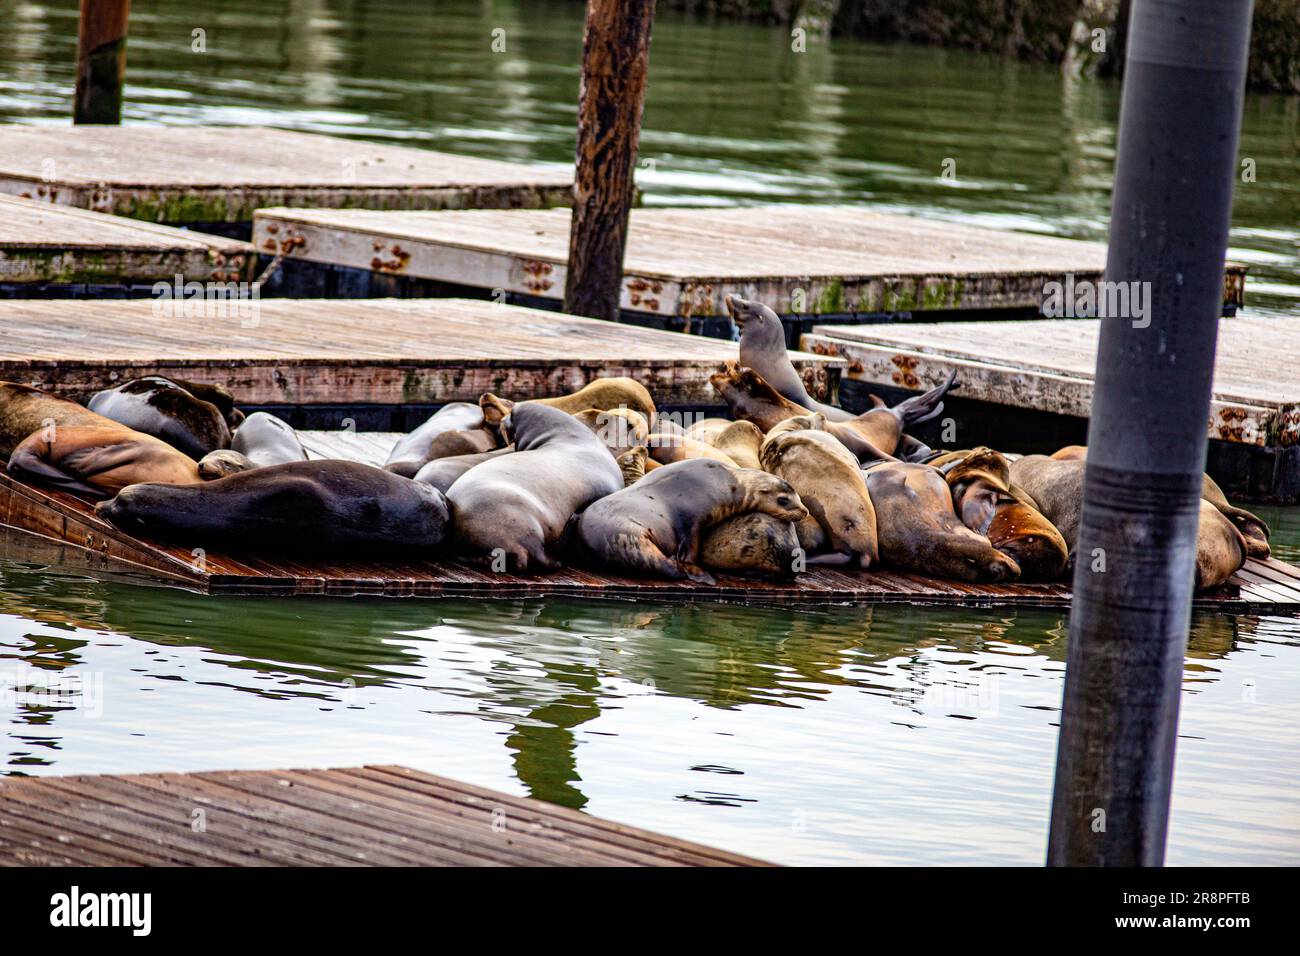 San Francisco Fisherman's Wharf with Pier 39 with sea lions